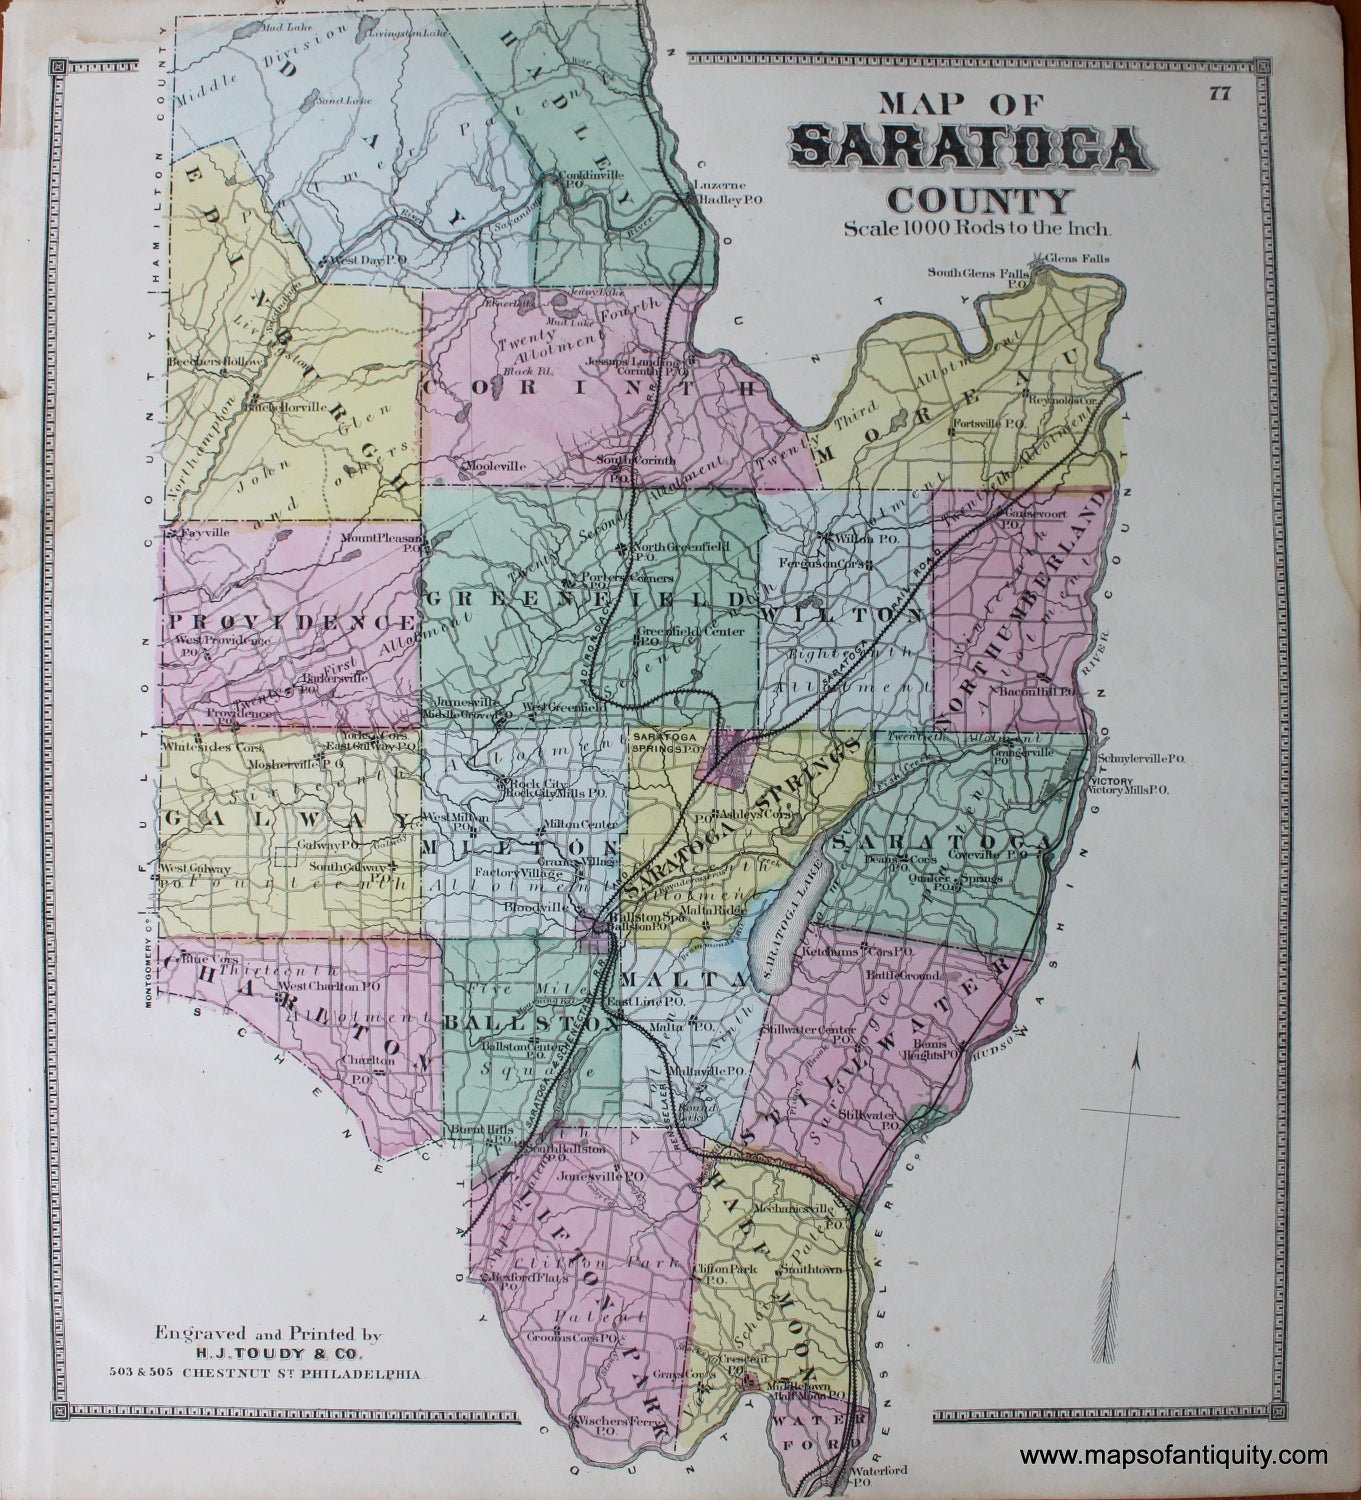 Hand-Colored-Engraved-Antique-Map-Map-of-Saratoga-New-York-United-States-Northeast-1866-Stone-and-Stewart-Maps-Of-Antiquity